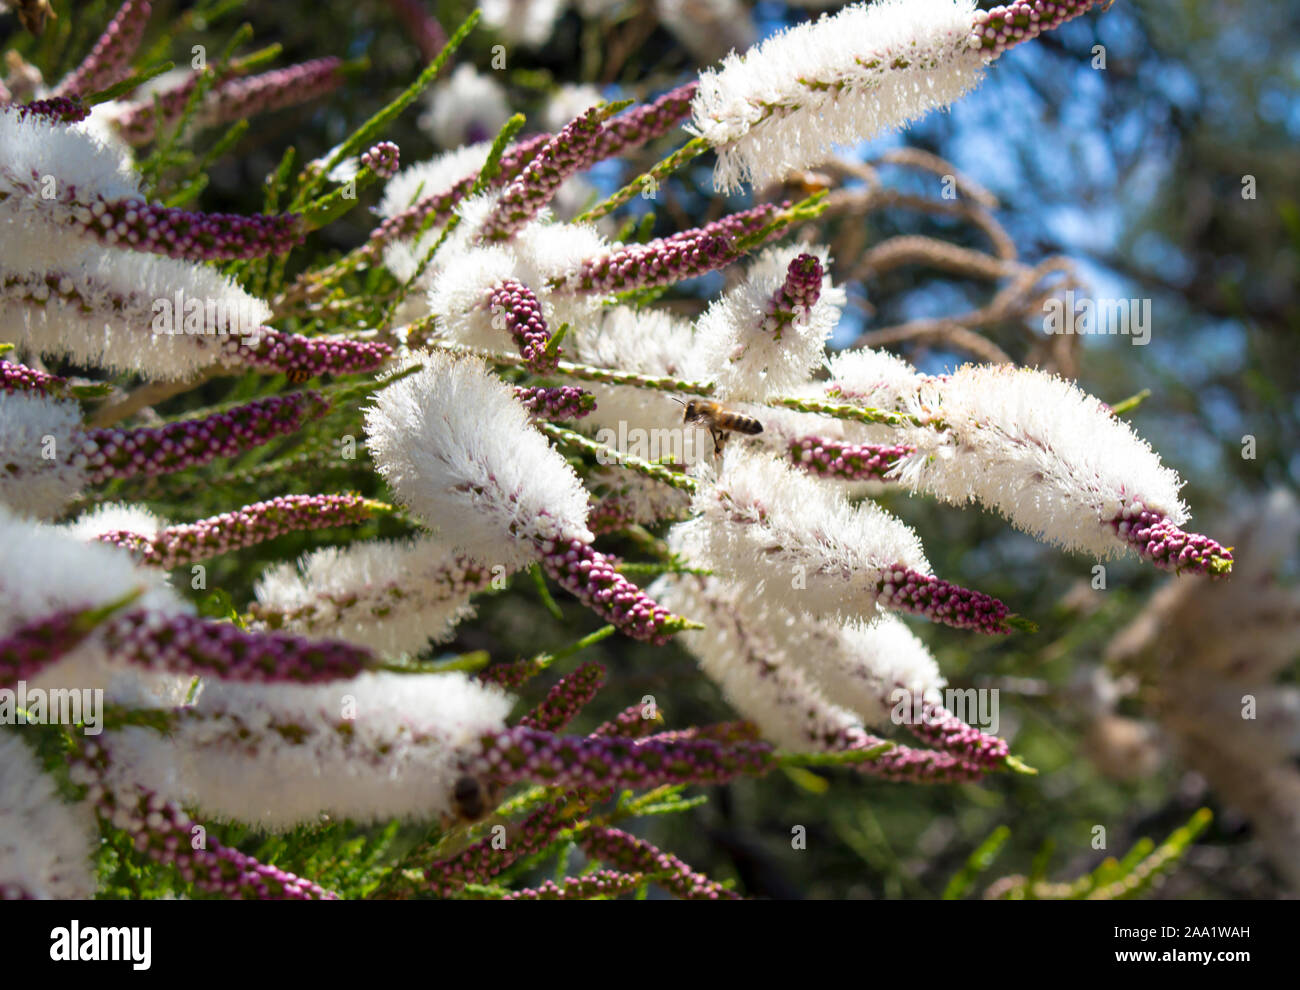 Fluffy White Flowers High Resolution Stock Photography and Images - Alamy